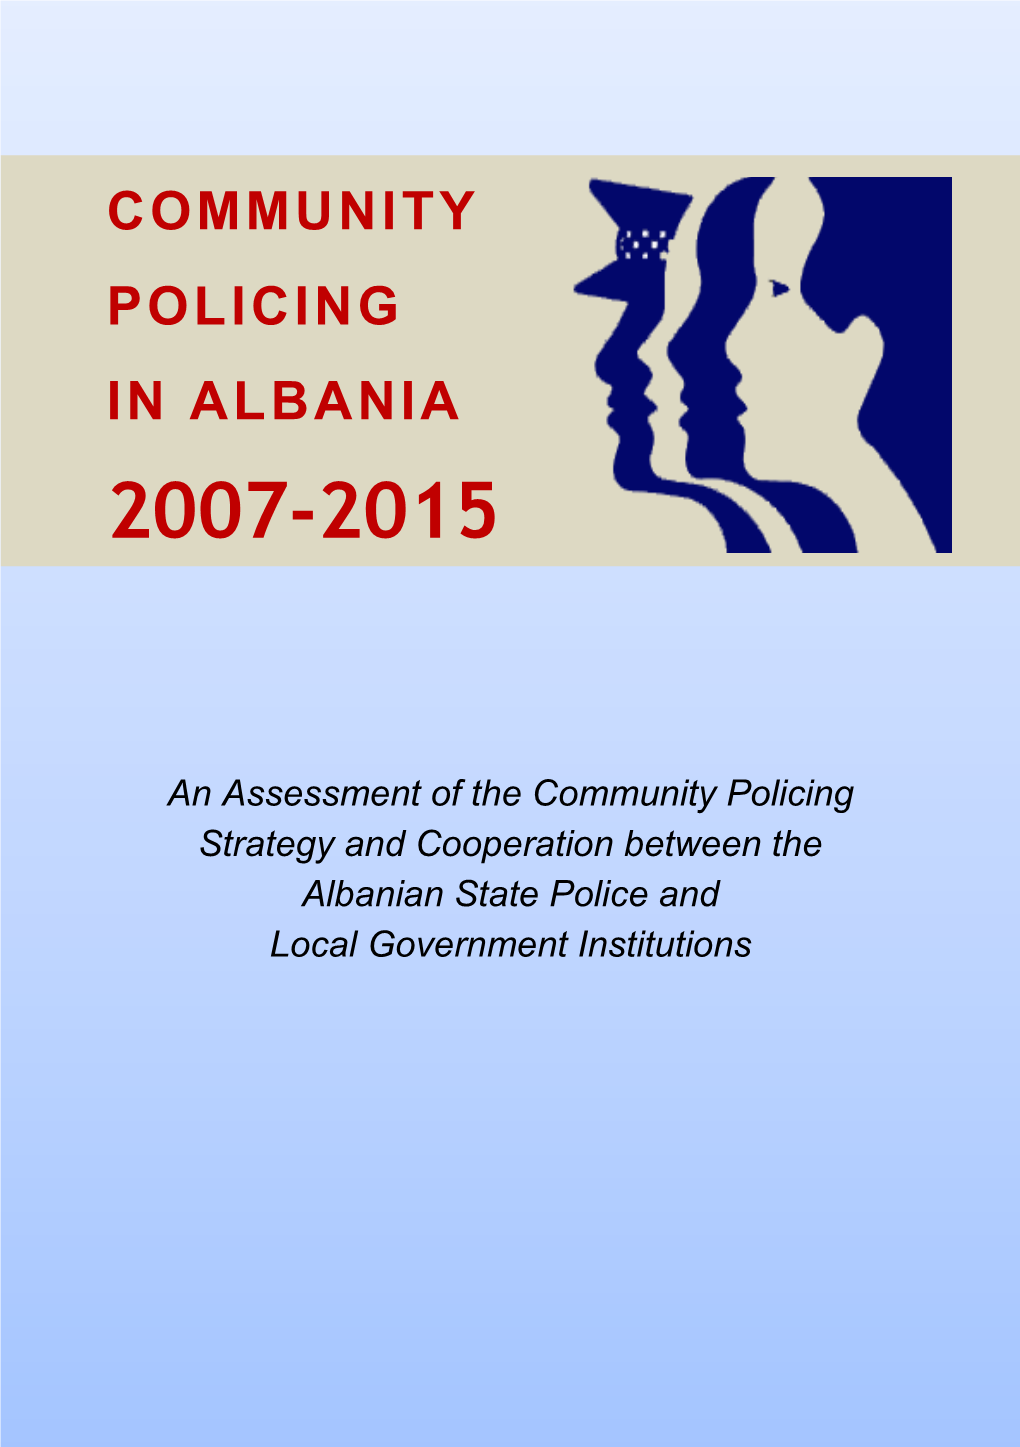 Community Policing in Albania 2007-2015